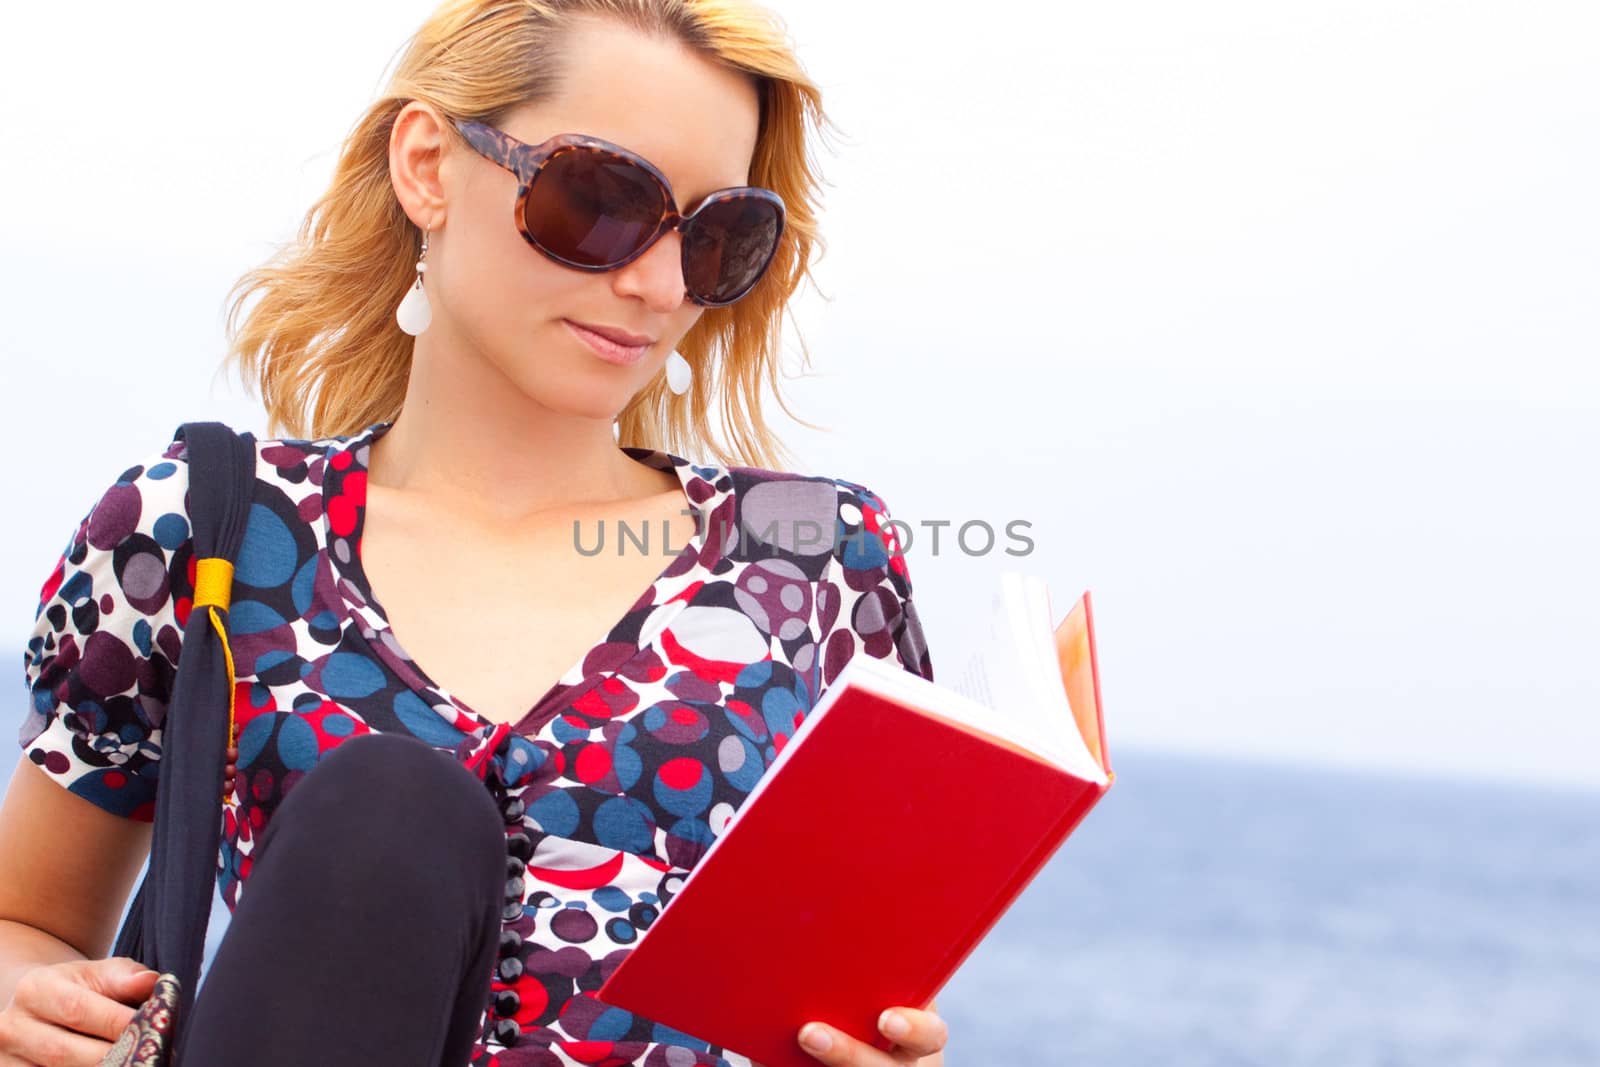 Attractive young lady reading a book by the sea.